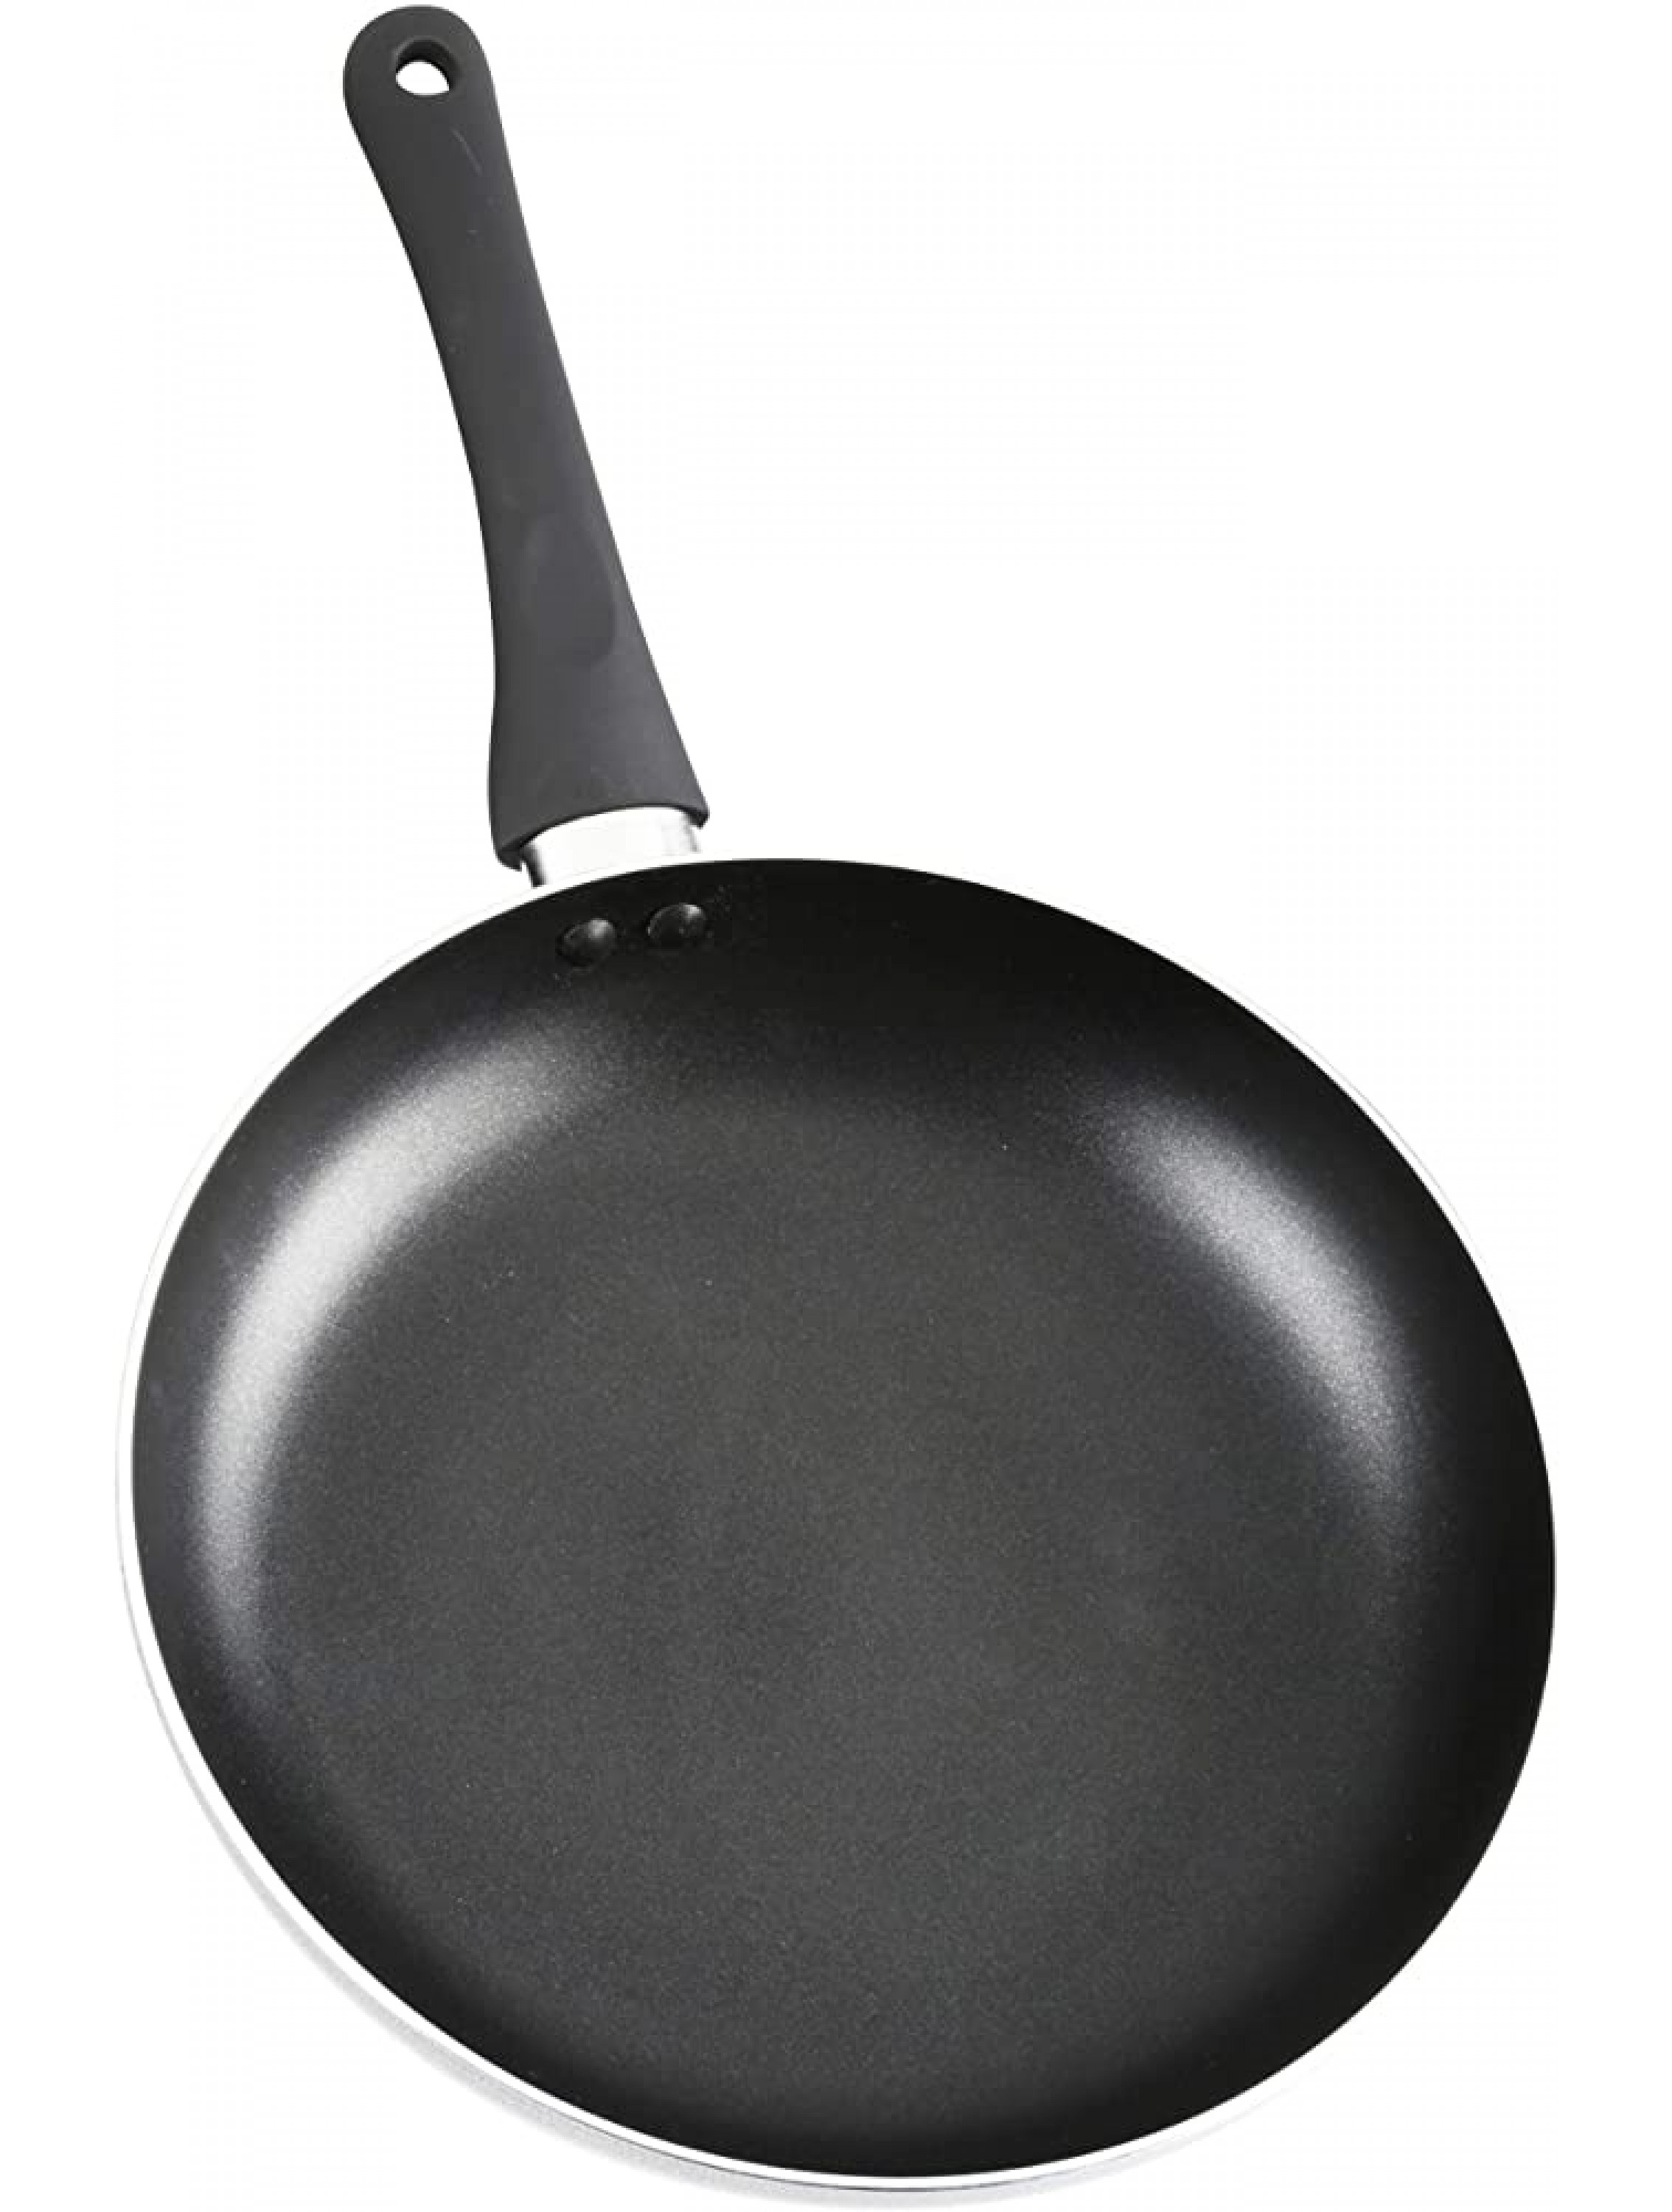 IMUSA USA Nonstick Soft Touch Handle 10 Charcoal Saute Pan w Black - BEN64TBSD